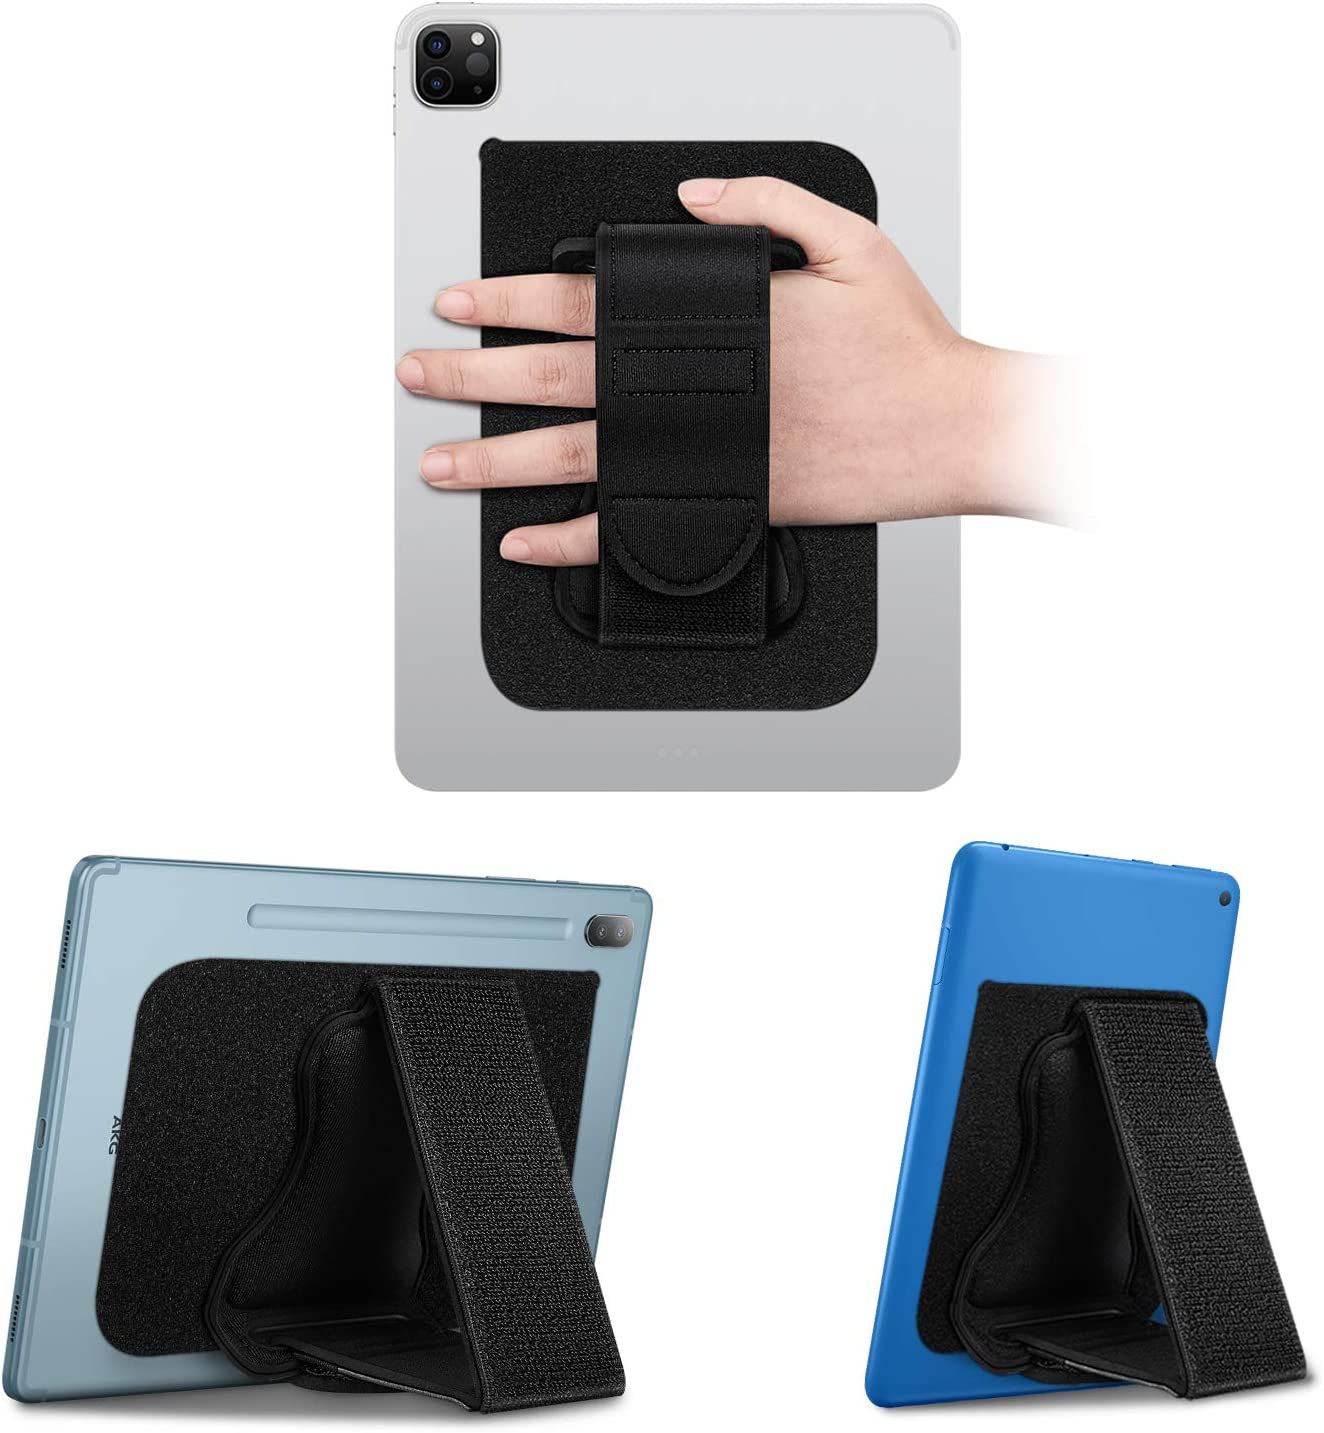 the fintie universal tablet hand strap attached to an apple and android tablet